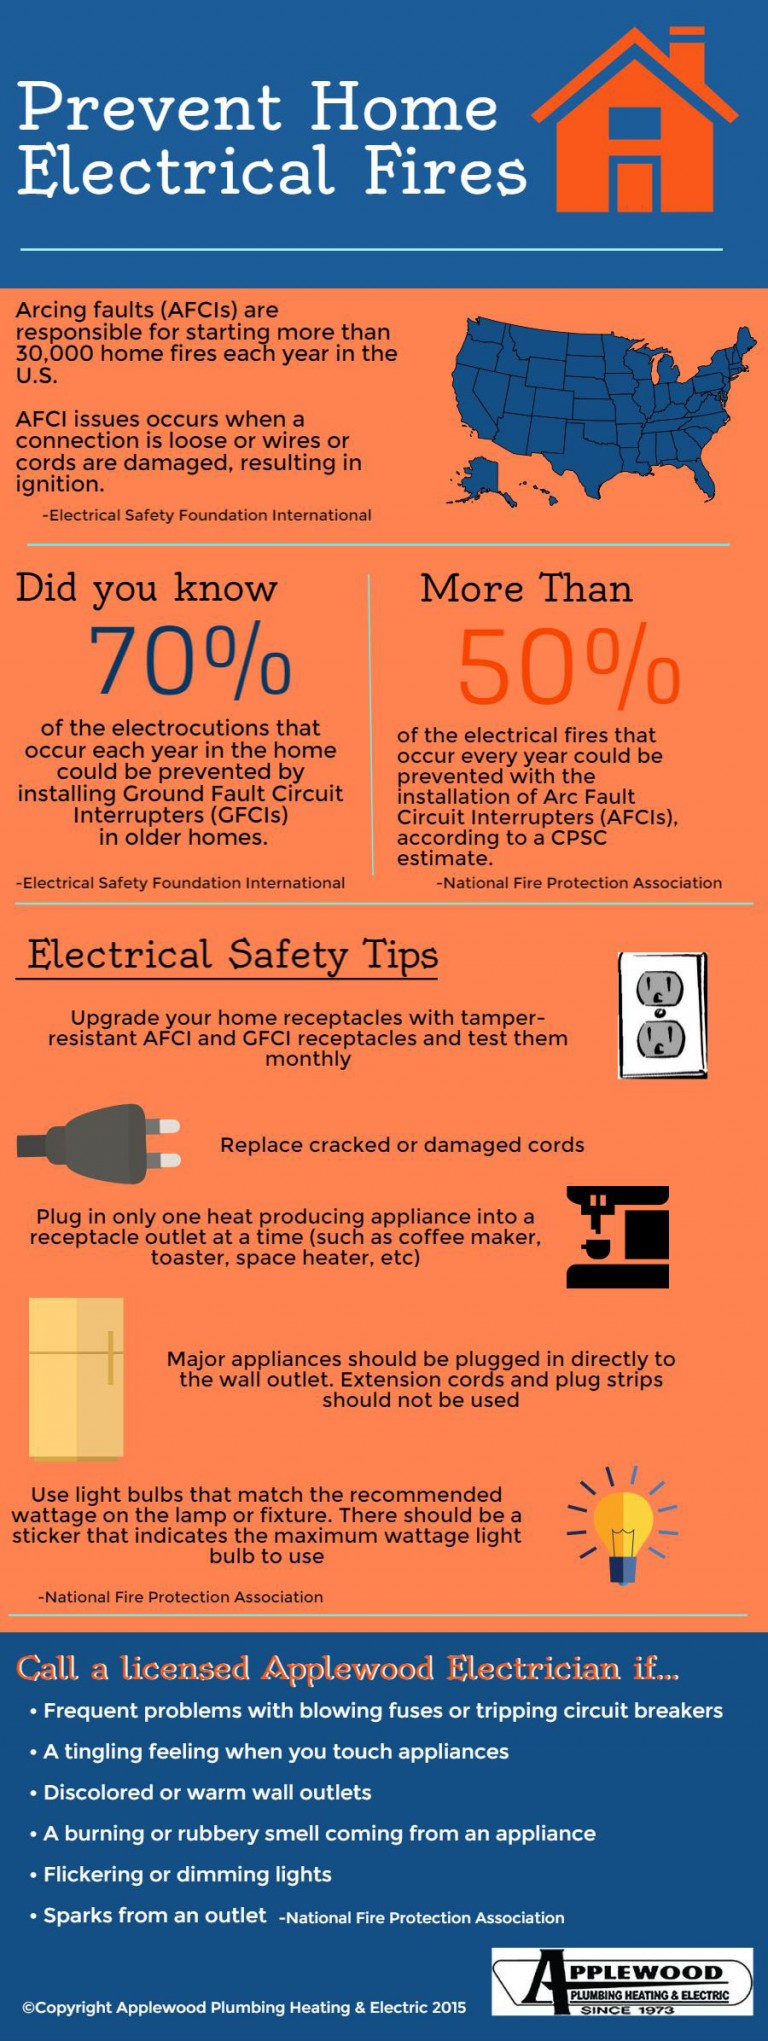 Preventing Home Electrical Fires | Applewood Plumbing